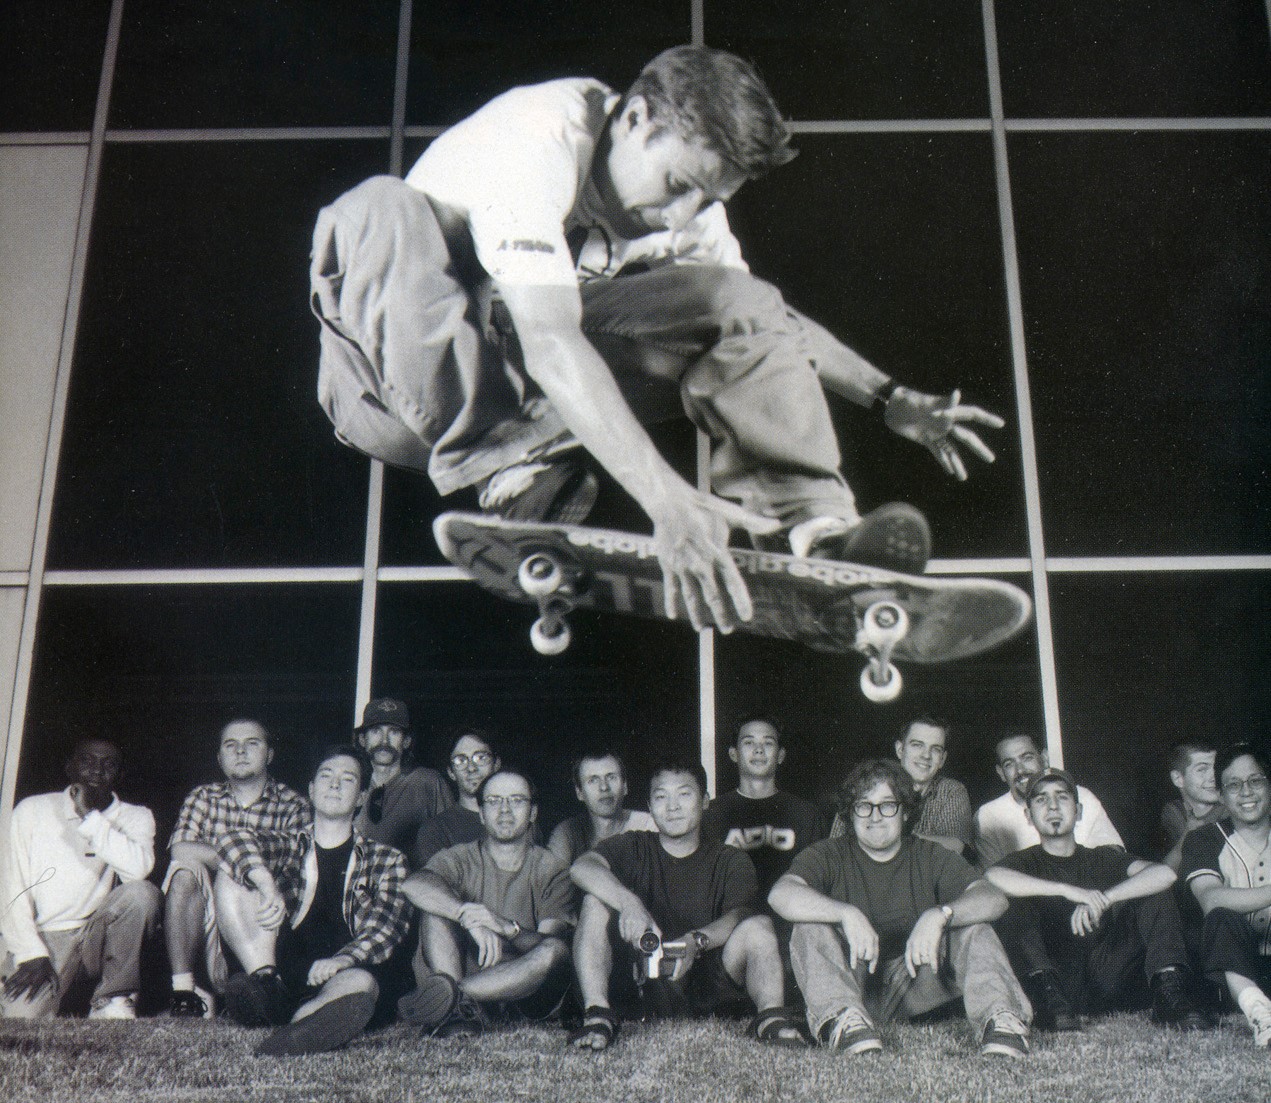 THPS2 Team Photo with Rodney Mullen